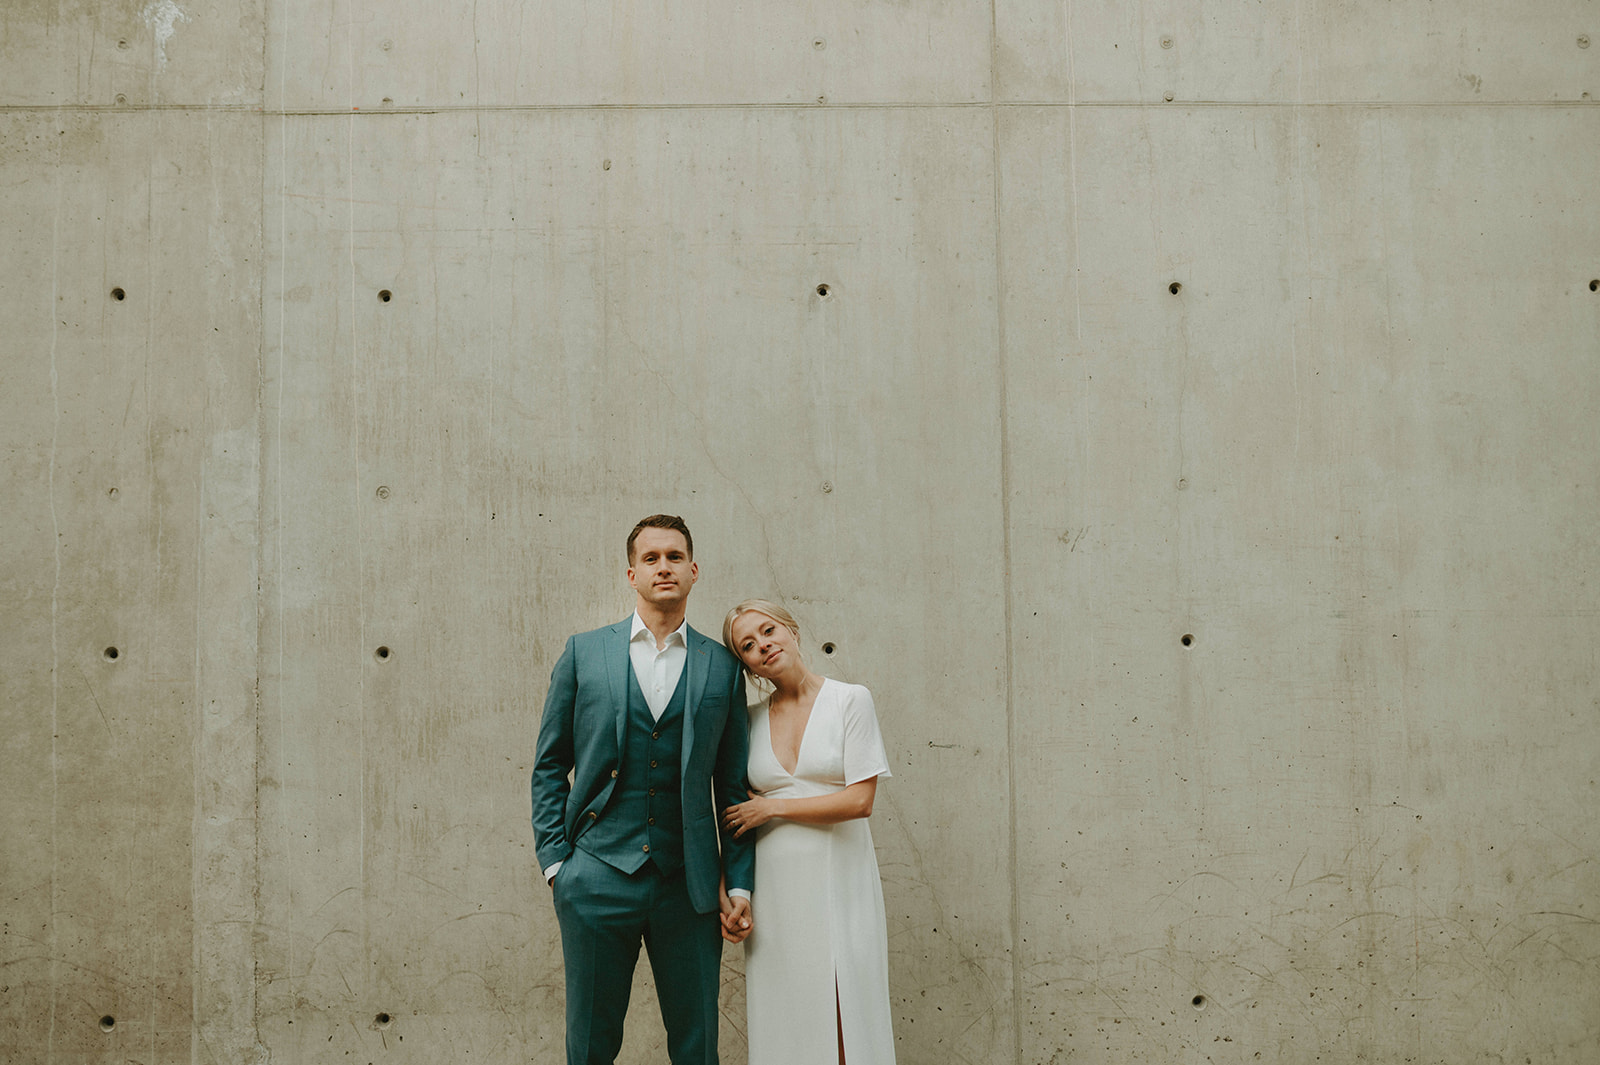 This Minimalist Micro-Wedding features a DIY Bouquet Made by the Bride Herself - bride and groom, modern wedding